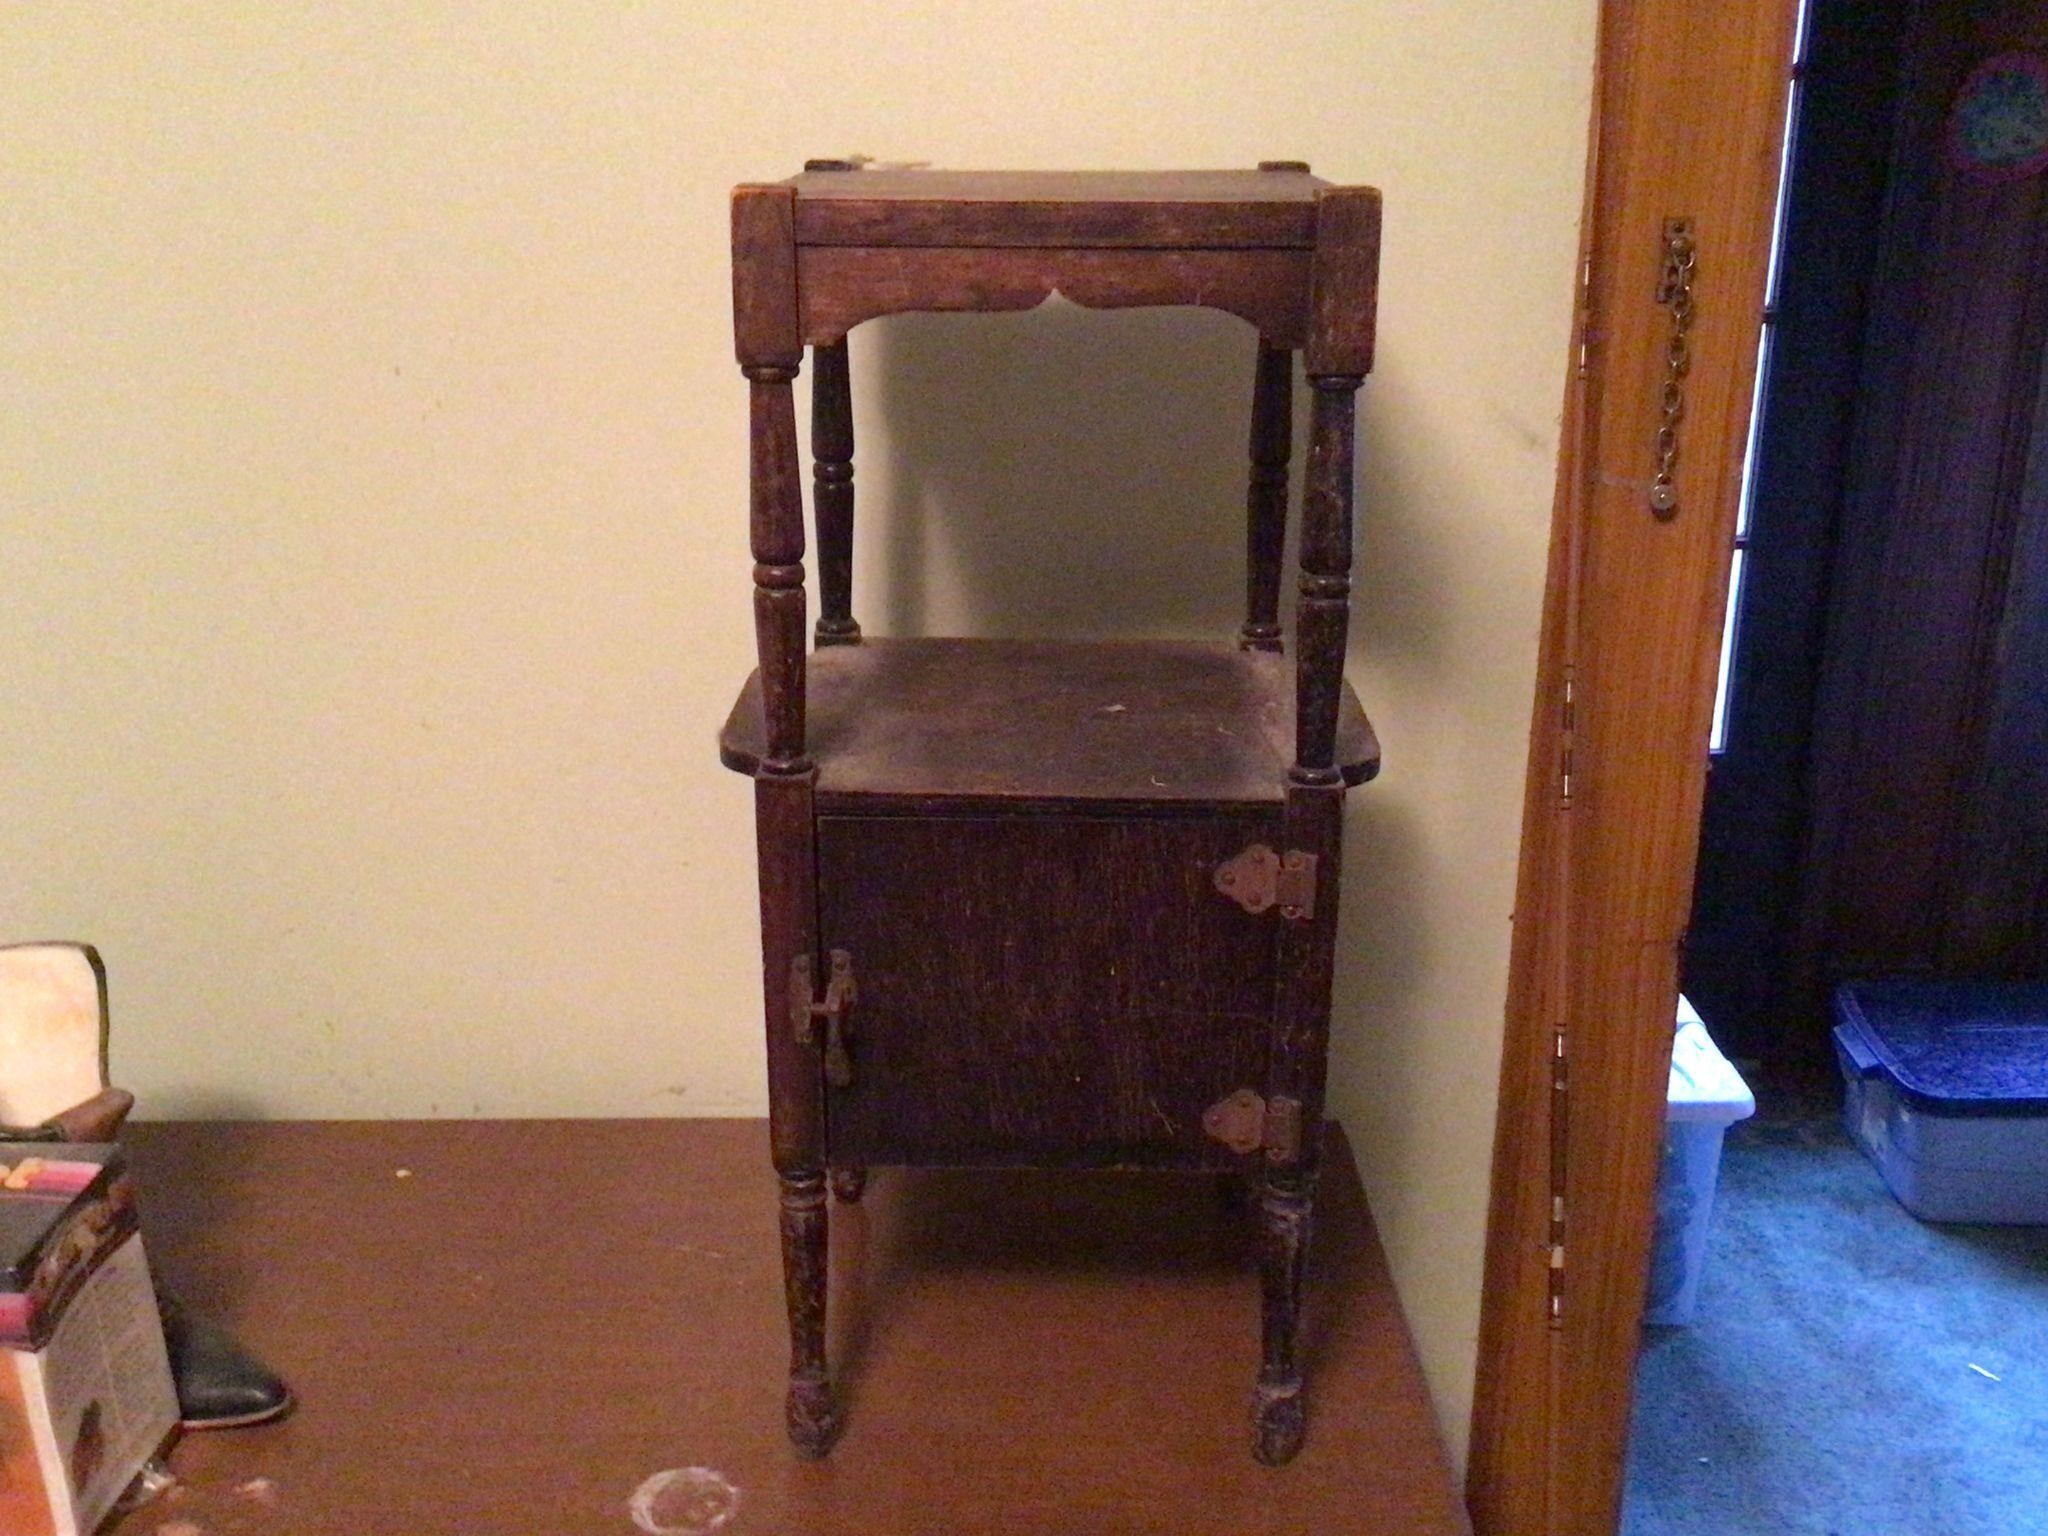 ANTIQUE SMOKING STAND = COPPER LINED